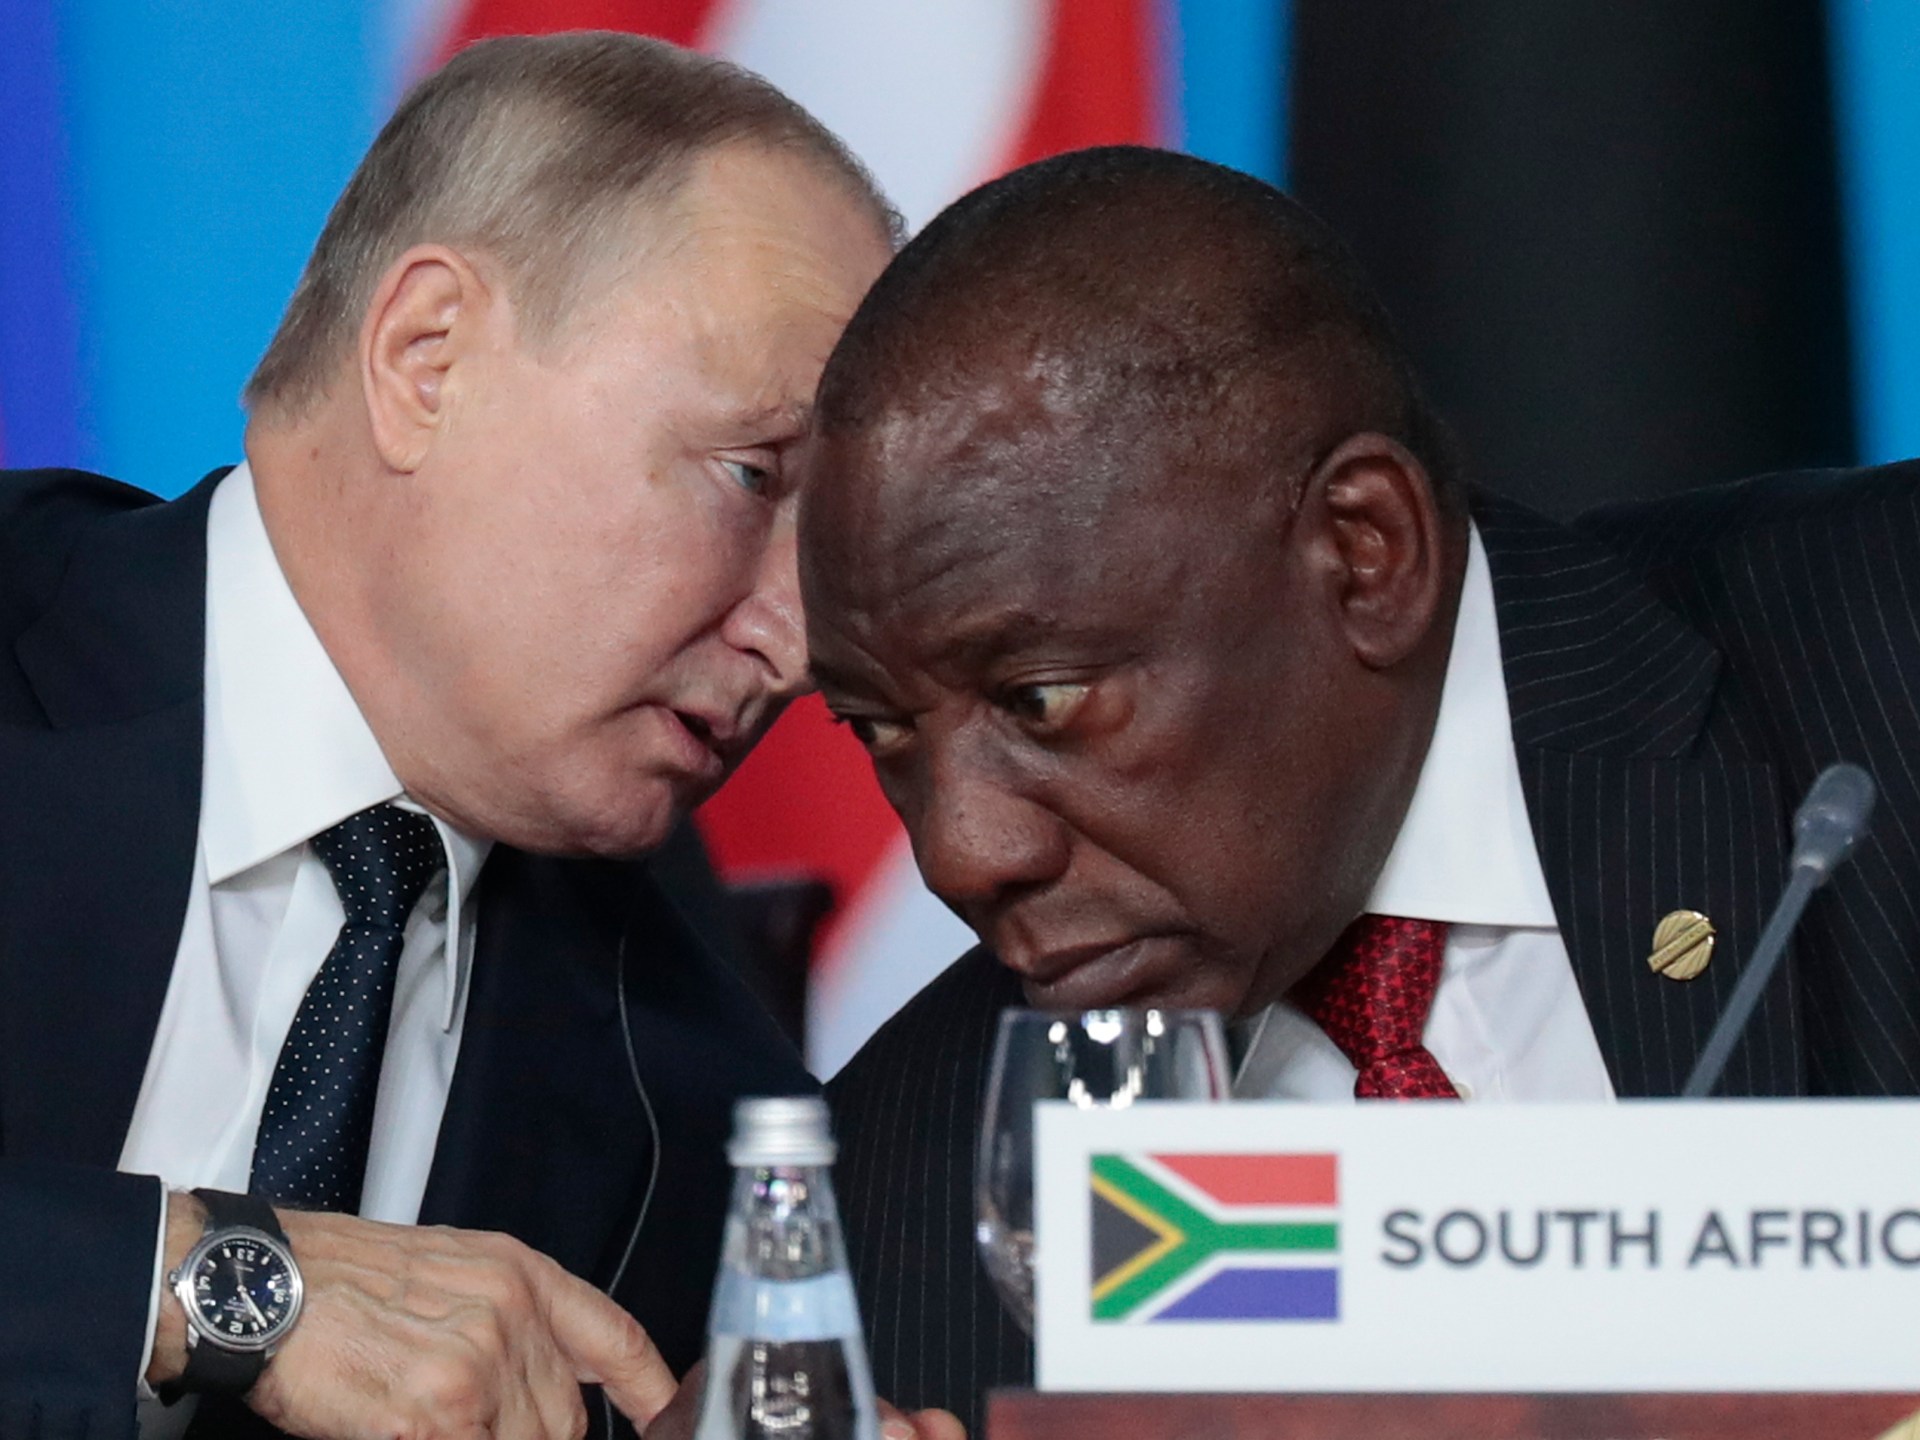 us-lawmaker-group-wants-s-africa-punished-over-russia-ties